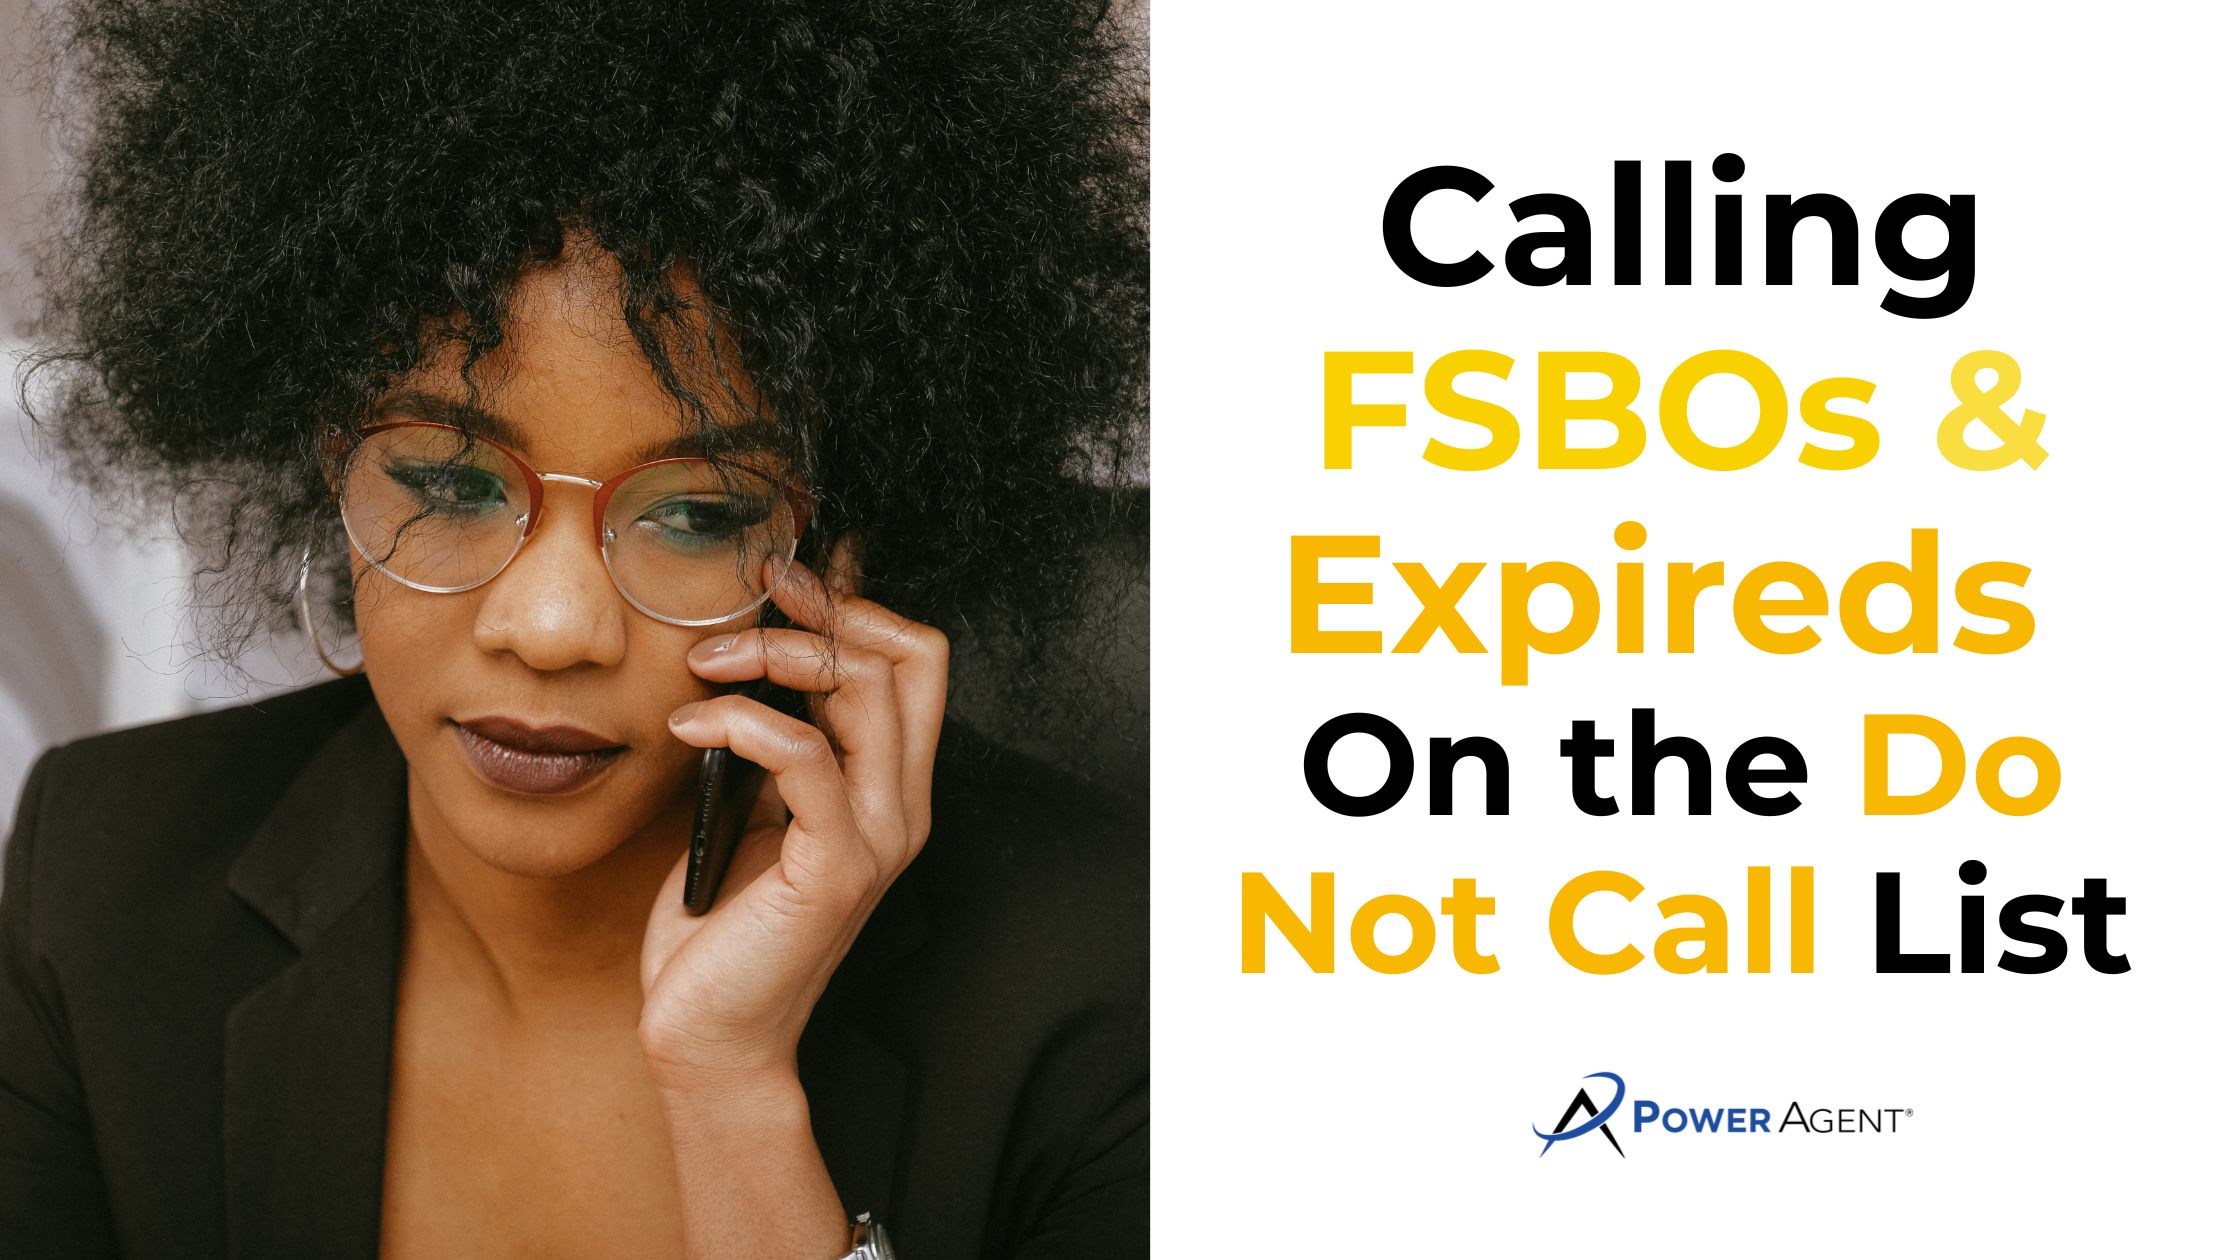 real estate coaching can you call fsbos and expireds on the do not call list